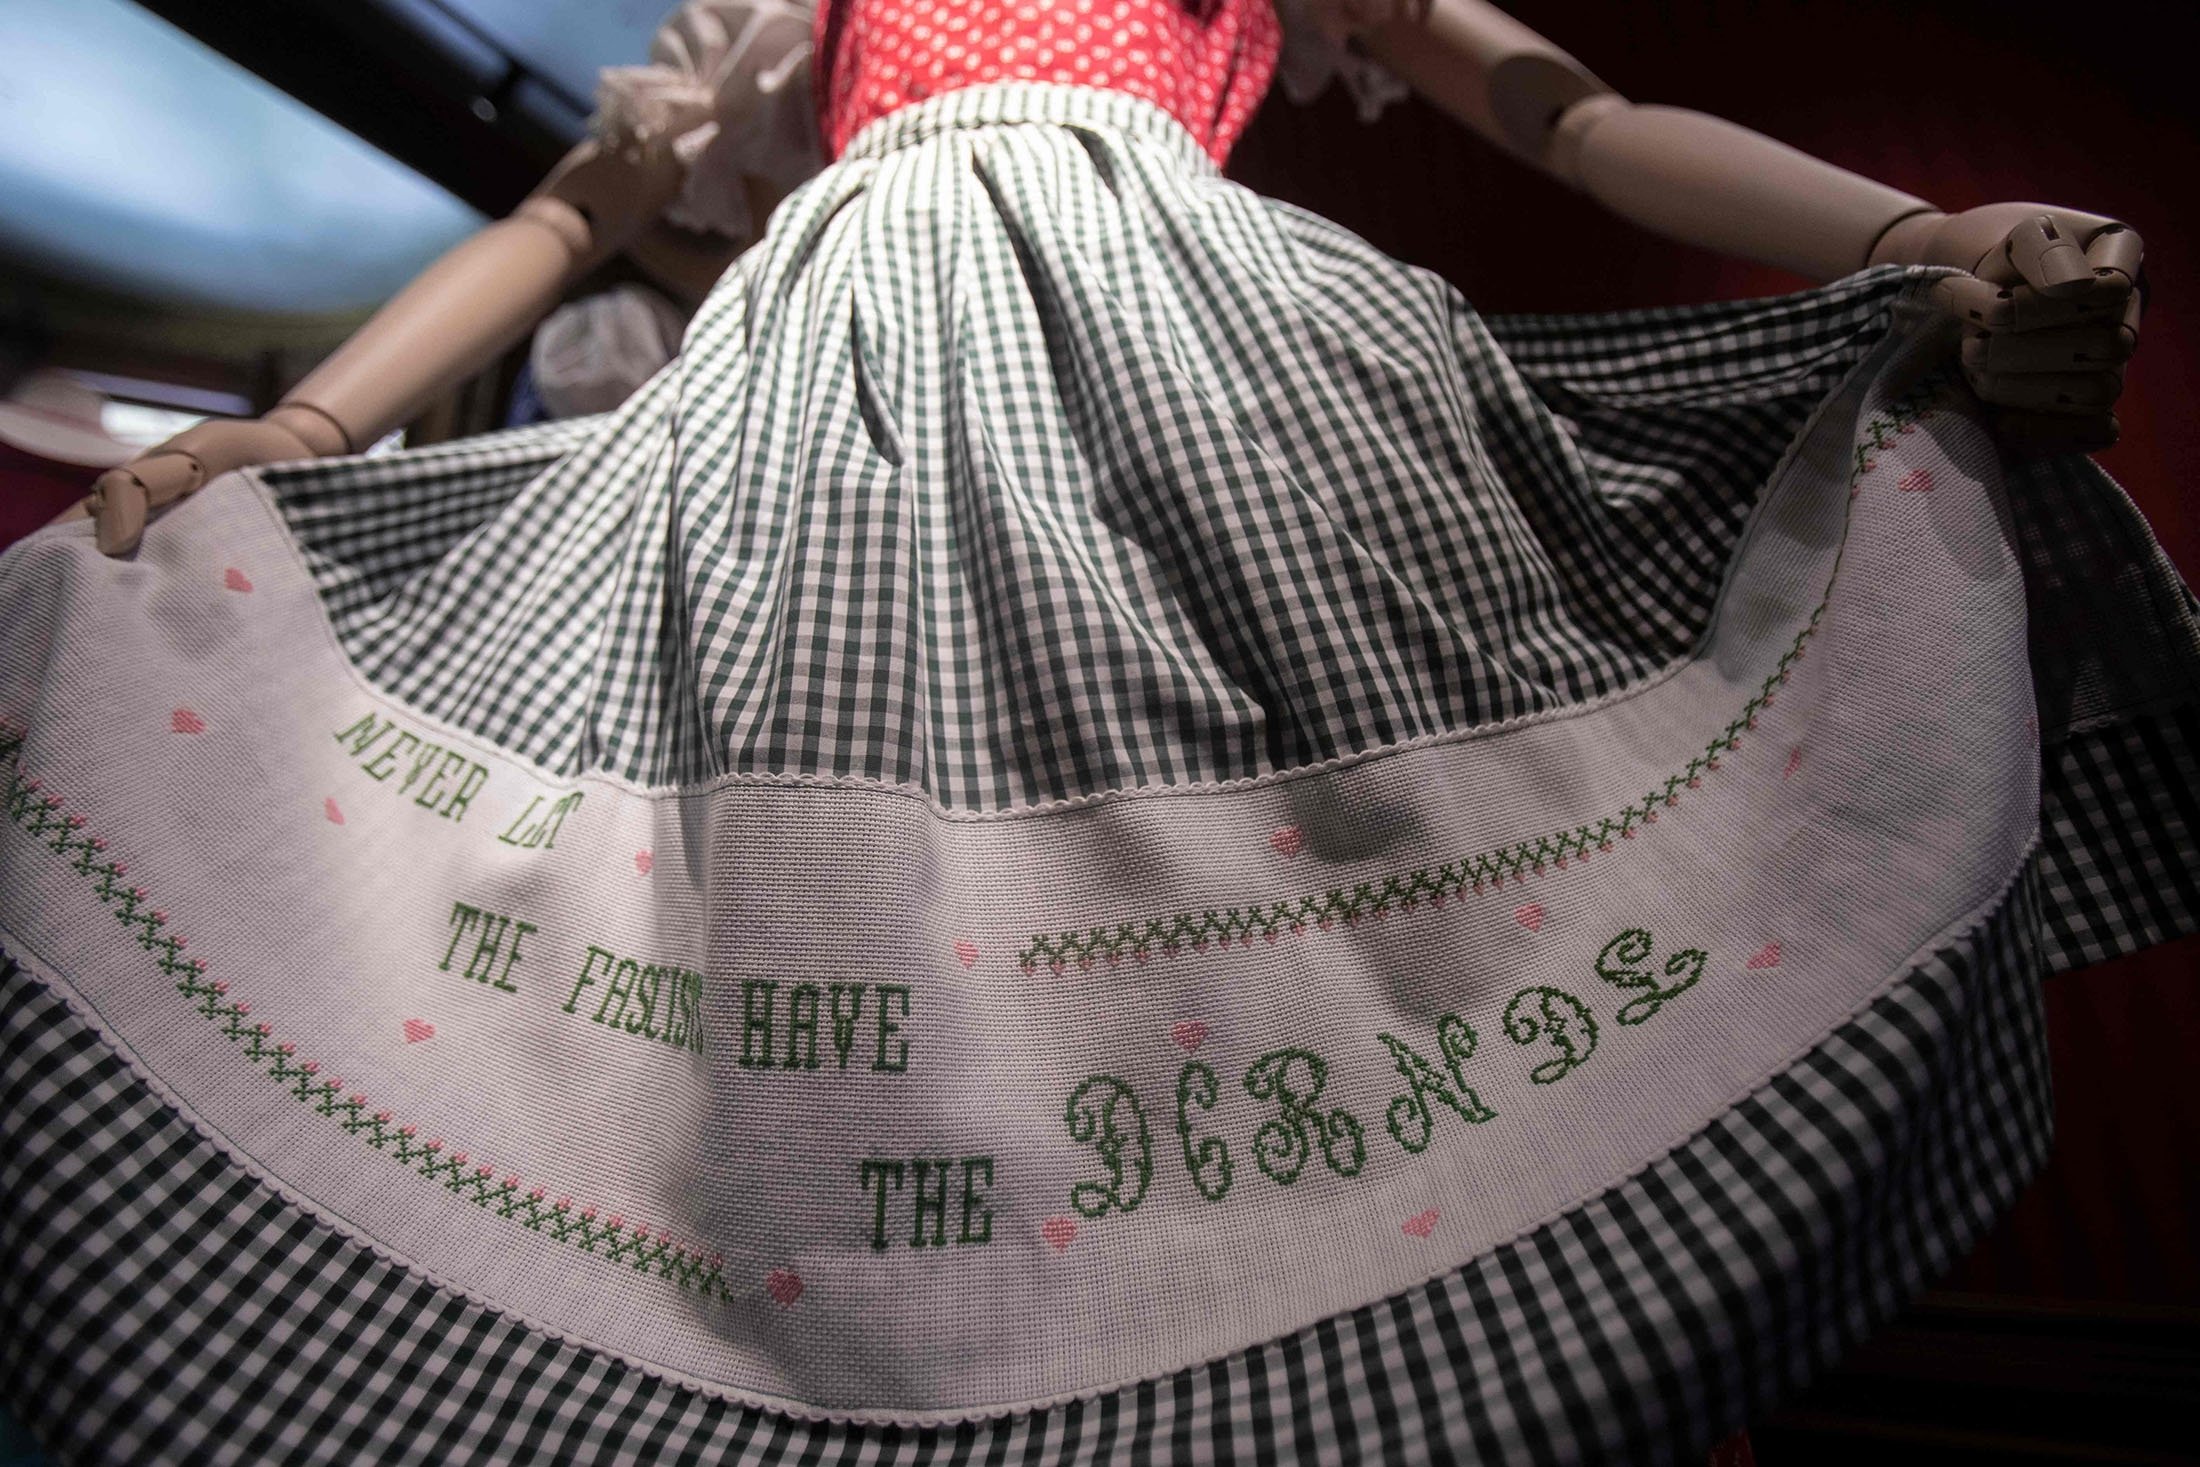 A dirndl dress with the stitched lettering "Never let the fascists have the DIRNDL" is on display at the exhibition "Dirndl – Tradition goes fashion" at the Mamorschloessl palace in Bad Ischl, Upper Austria, June 24, 2021. (AFP Photo)